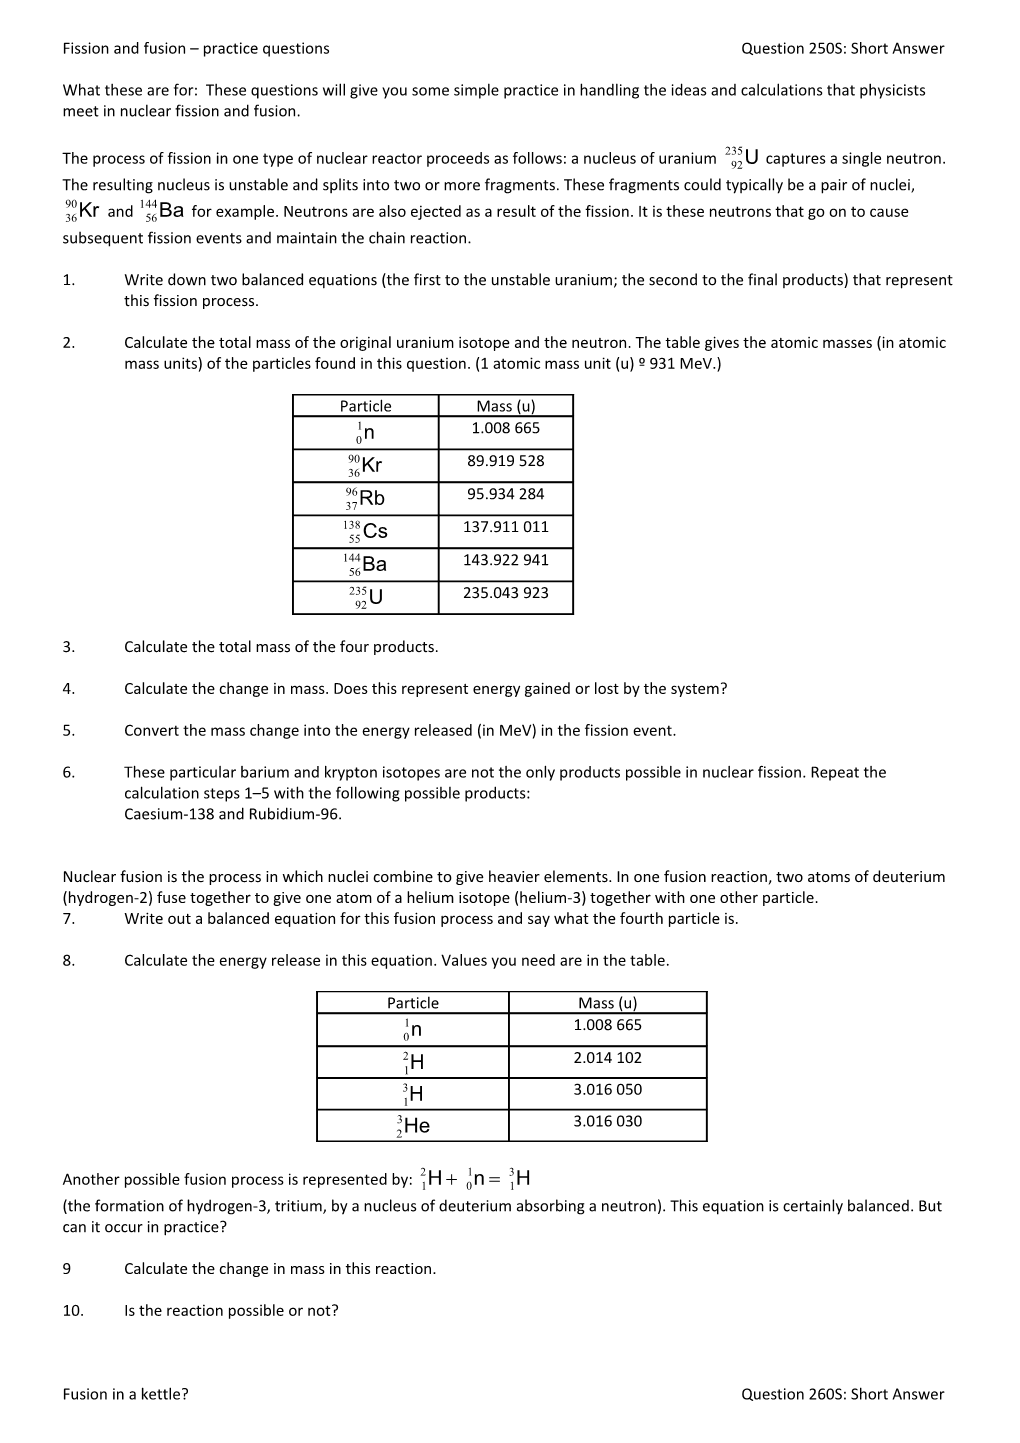 Fission and Fusion Practice Questionsquestion 250S: Short Answer